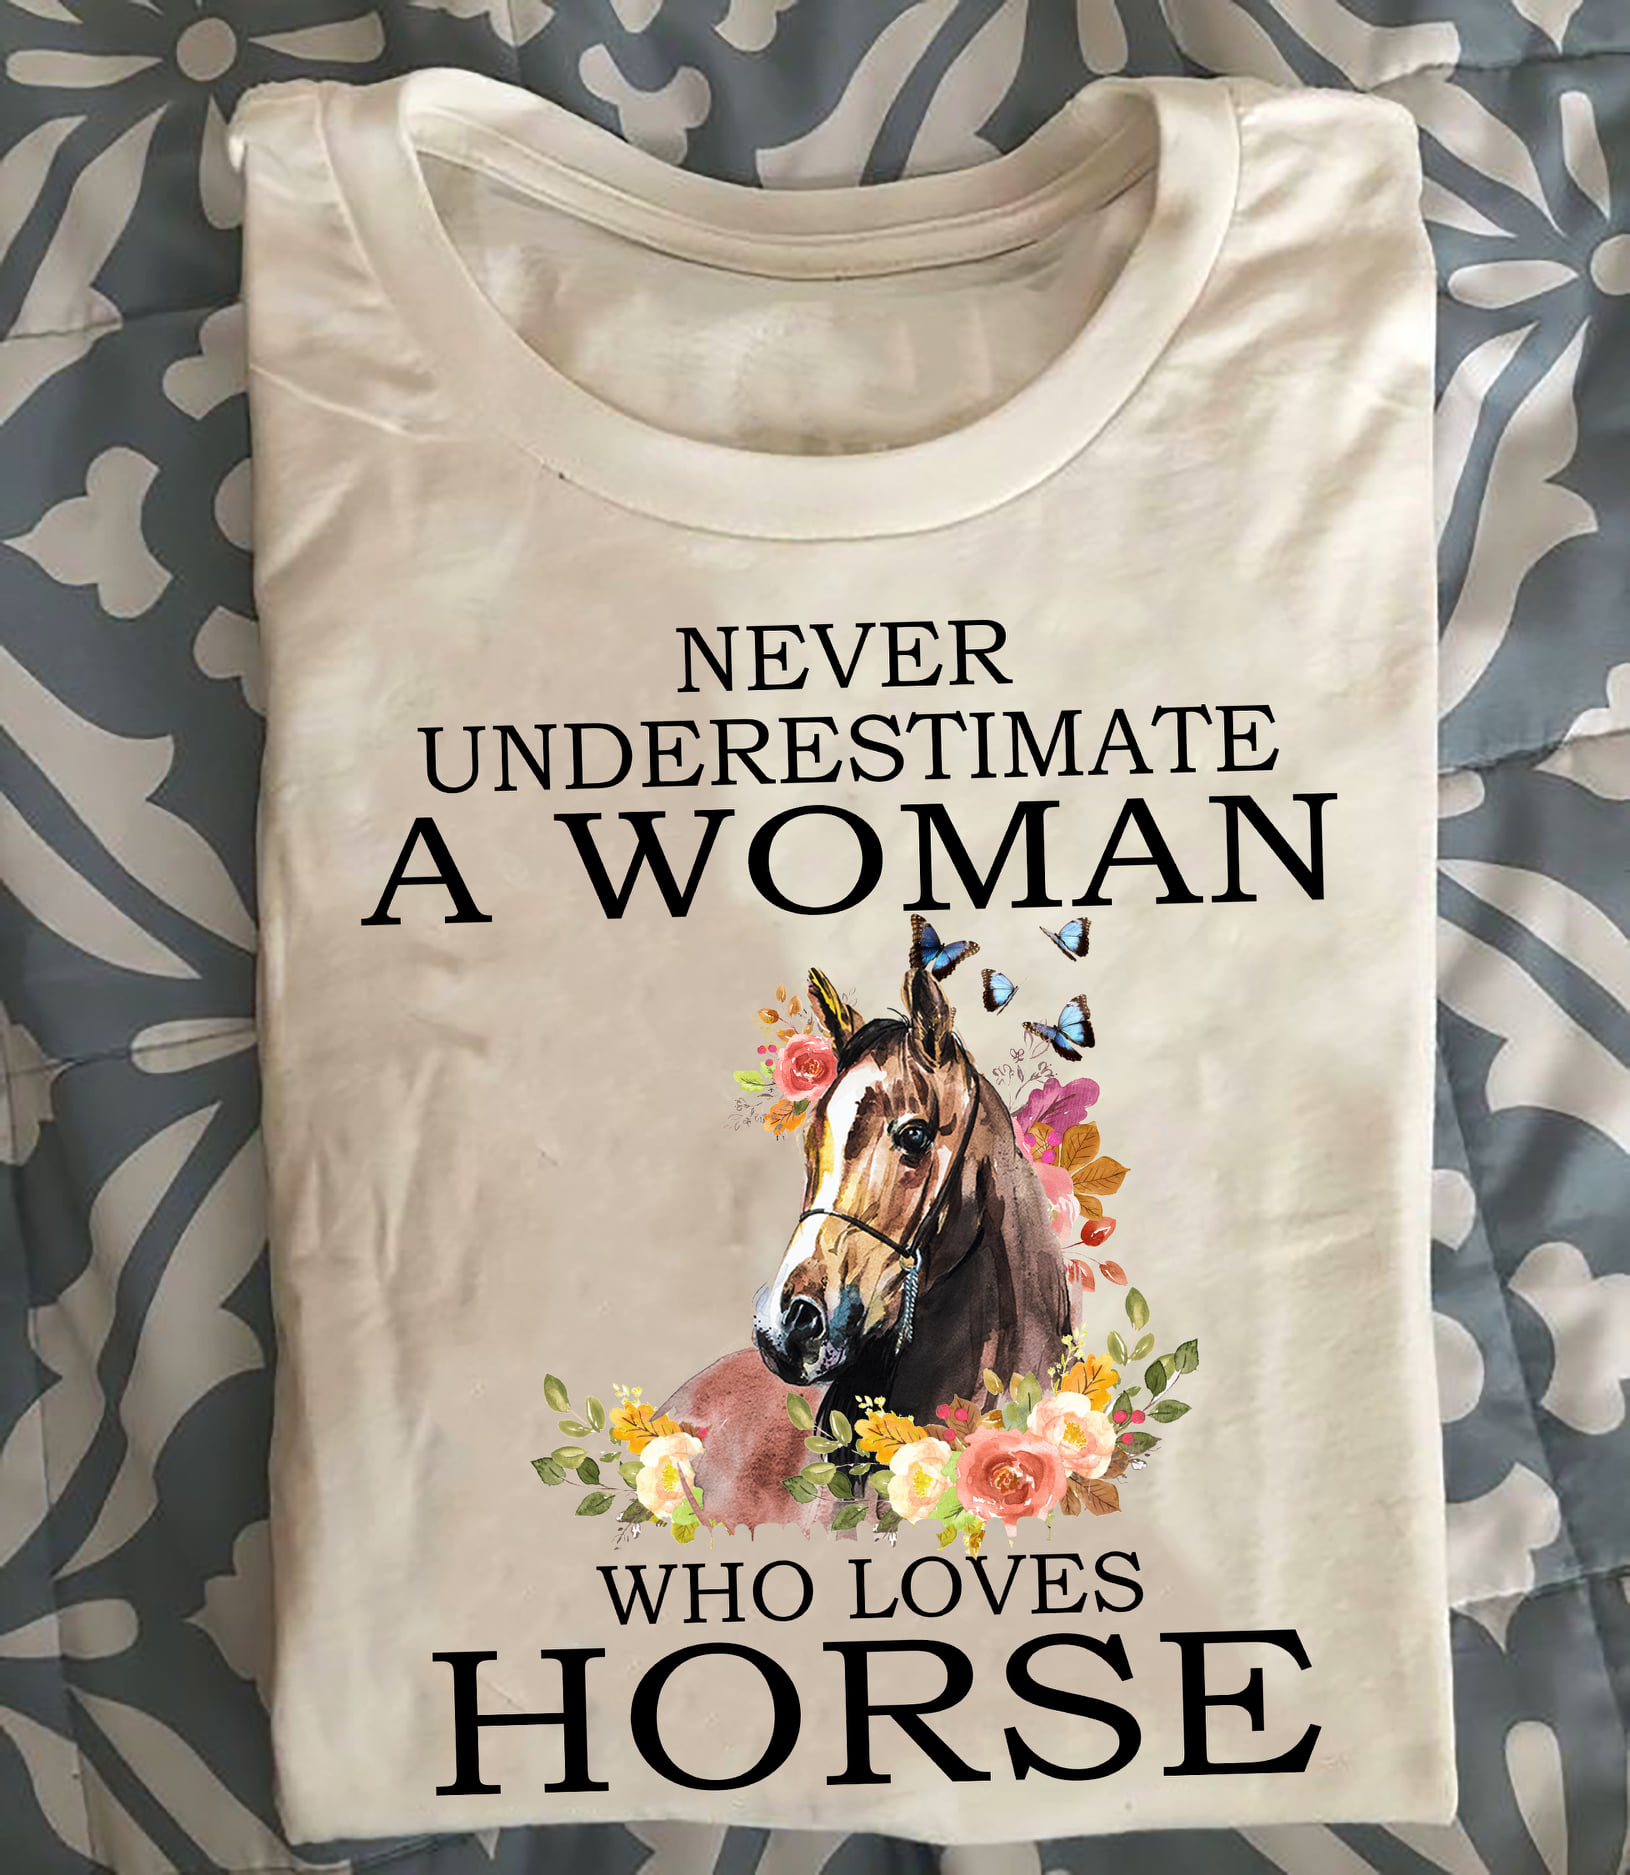 Never underestimate a woman who loves horse - Horse lover, woman and horse